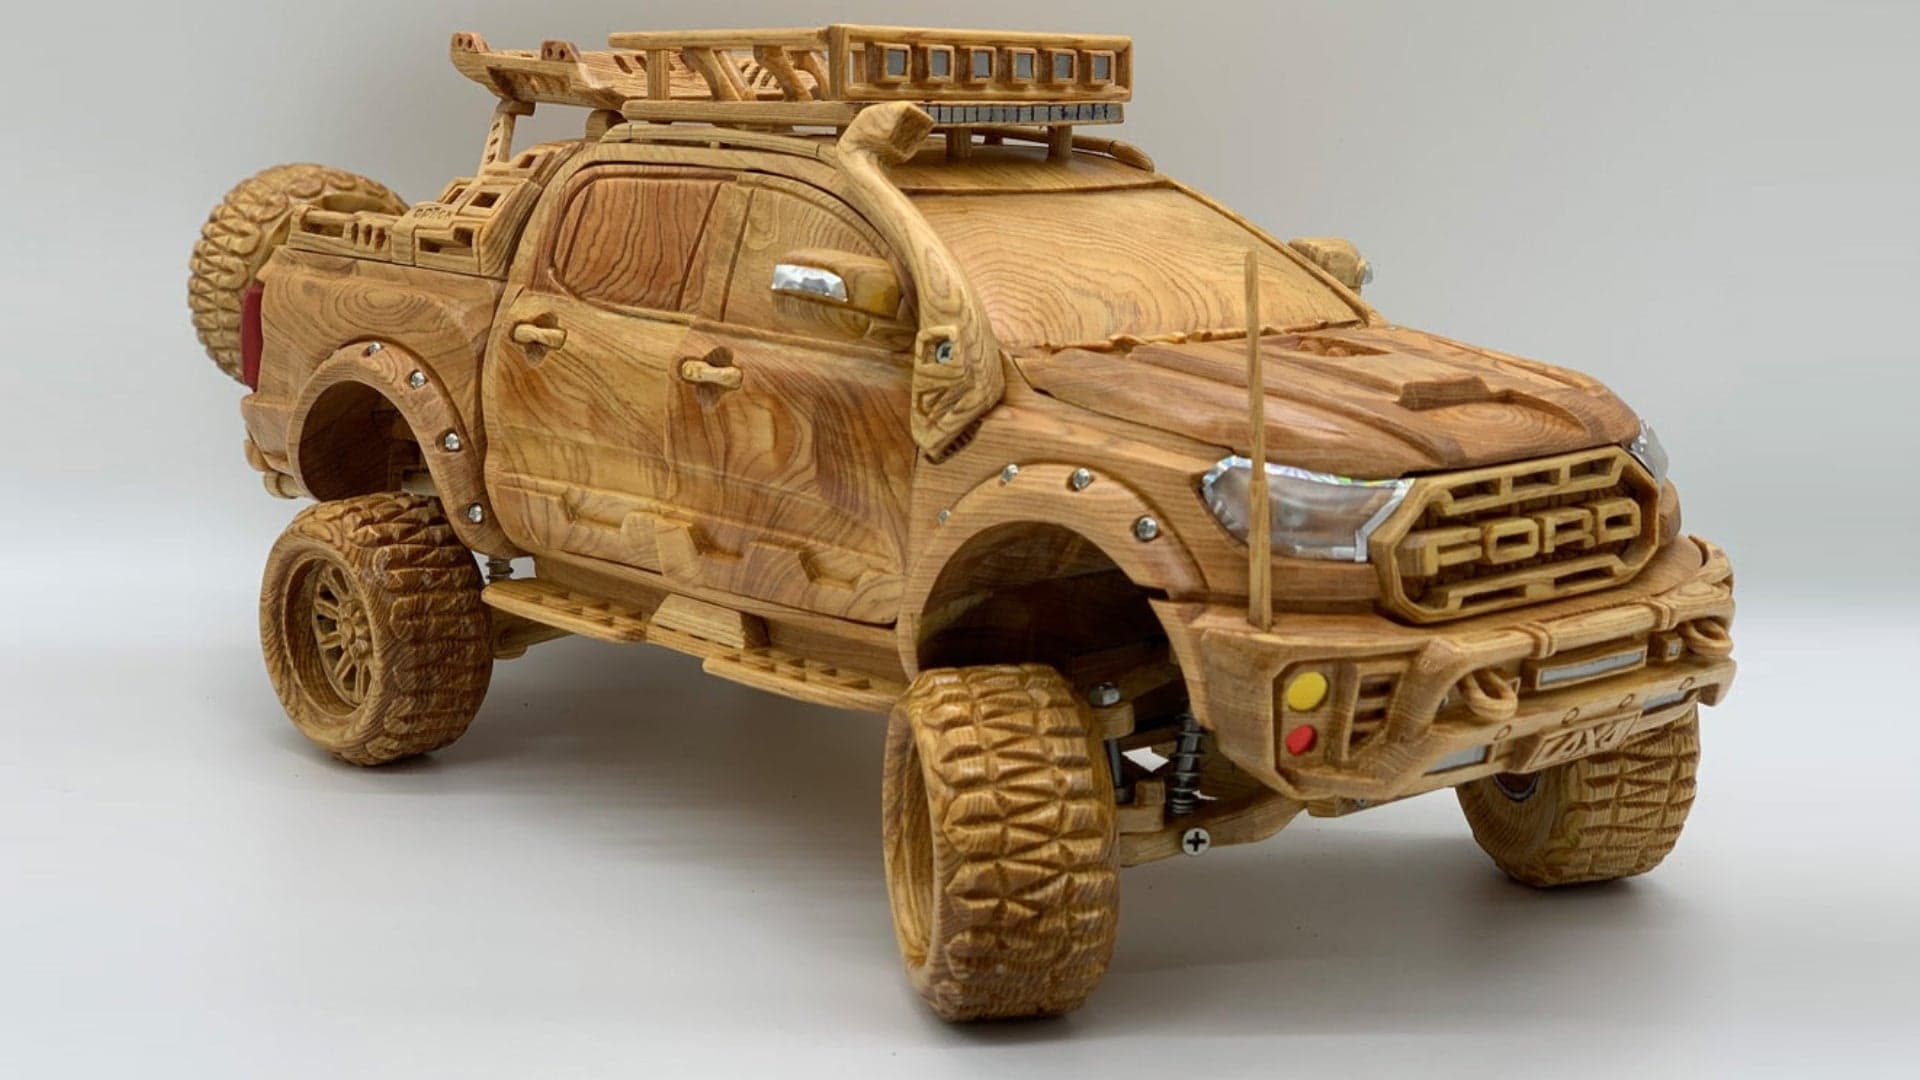 Watch This Master Artisan Carve a Ford Ranger Raptor Pickup From a Block of Wood